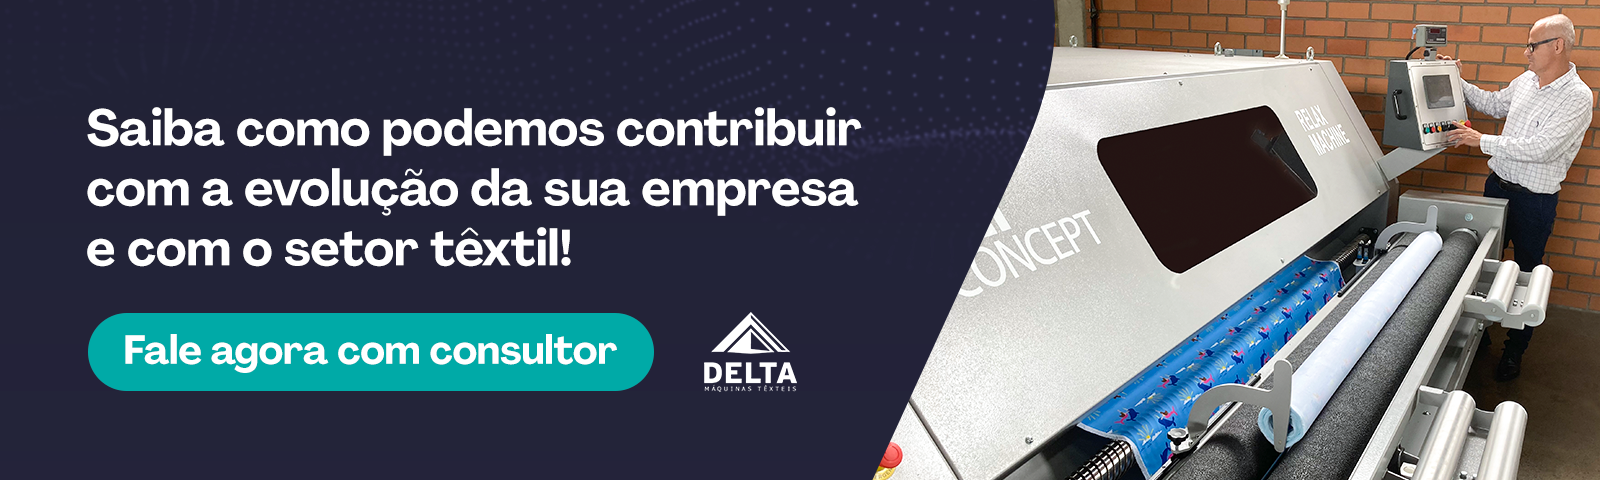 Find out how Delta can contribute to the evolution of the company and the textile sector: click and talk to the consultant now!